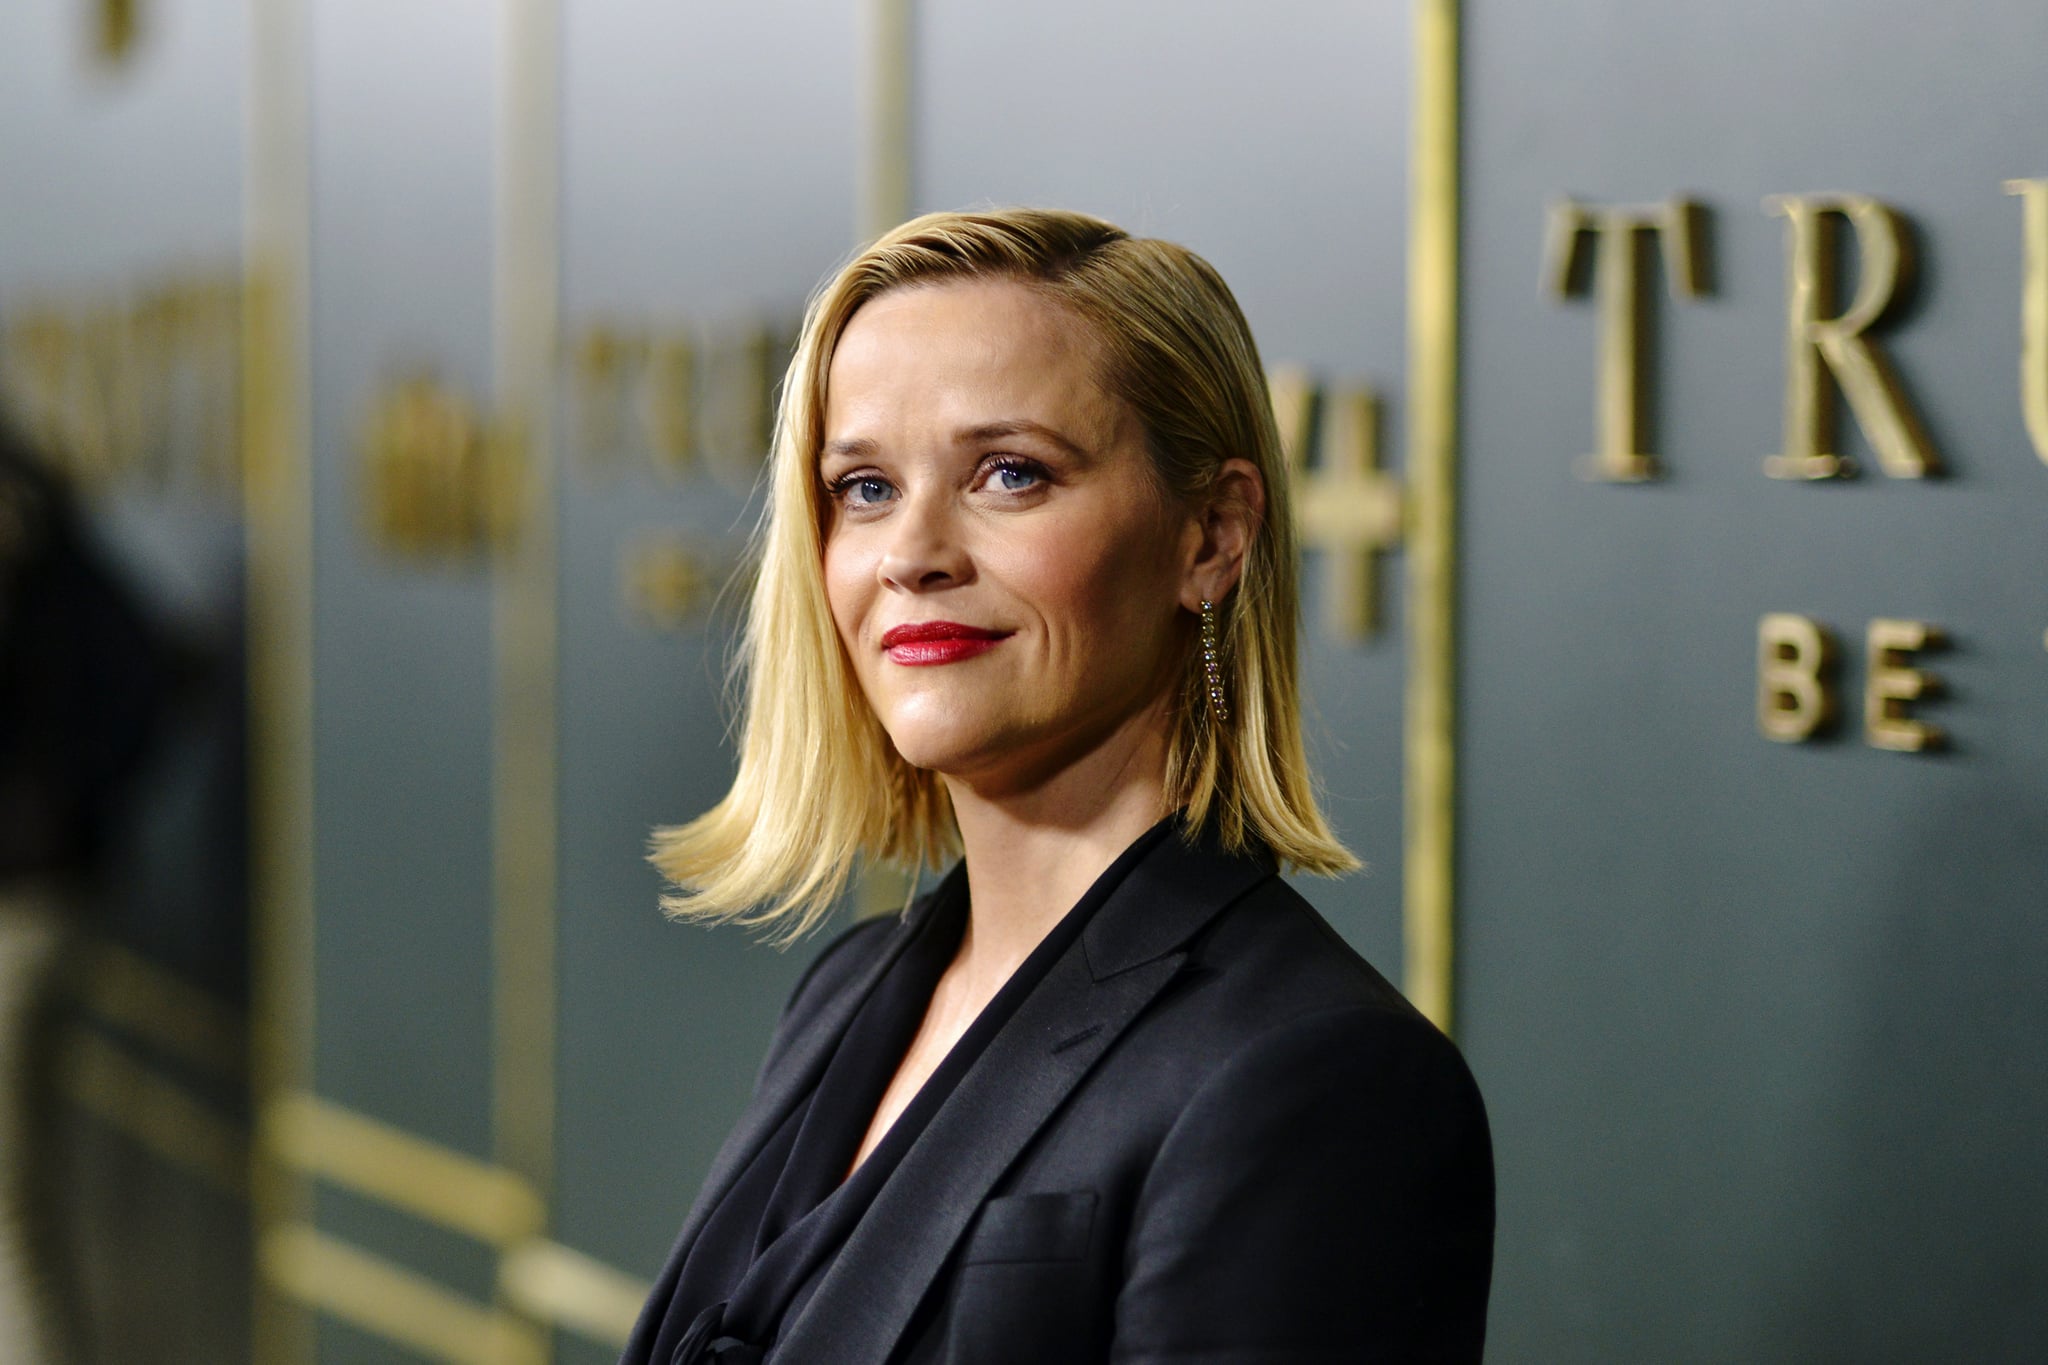 BEVERLY HILLS, CALIFORNIA - NOVEMBER 11: Executive Producer Reese Witherspoon arrives at the premiere of Apple TV+'s 'Truth Be Told' at AMPAS Samuel Goldwyn Theatre on November 11, 2019 in Beverly Hills, California. (Photo by Jerod Harris/Getty Images)